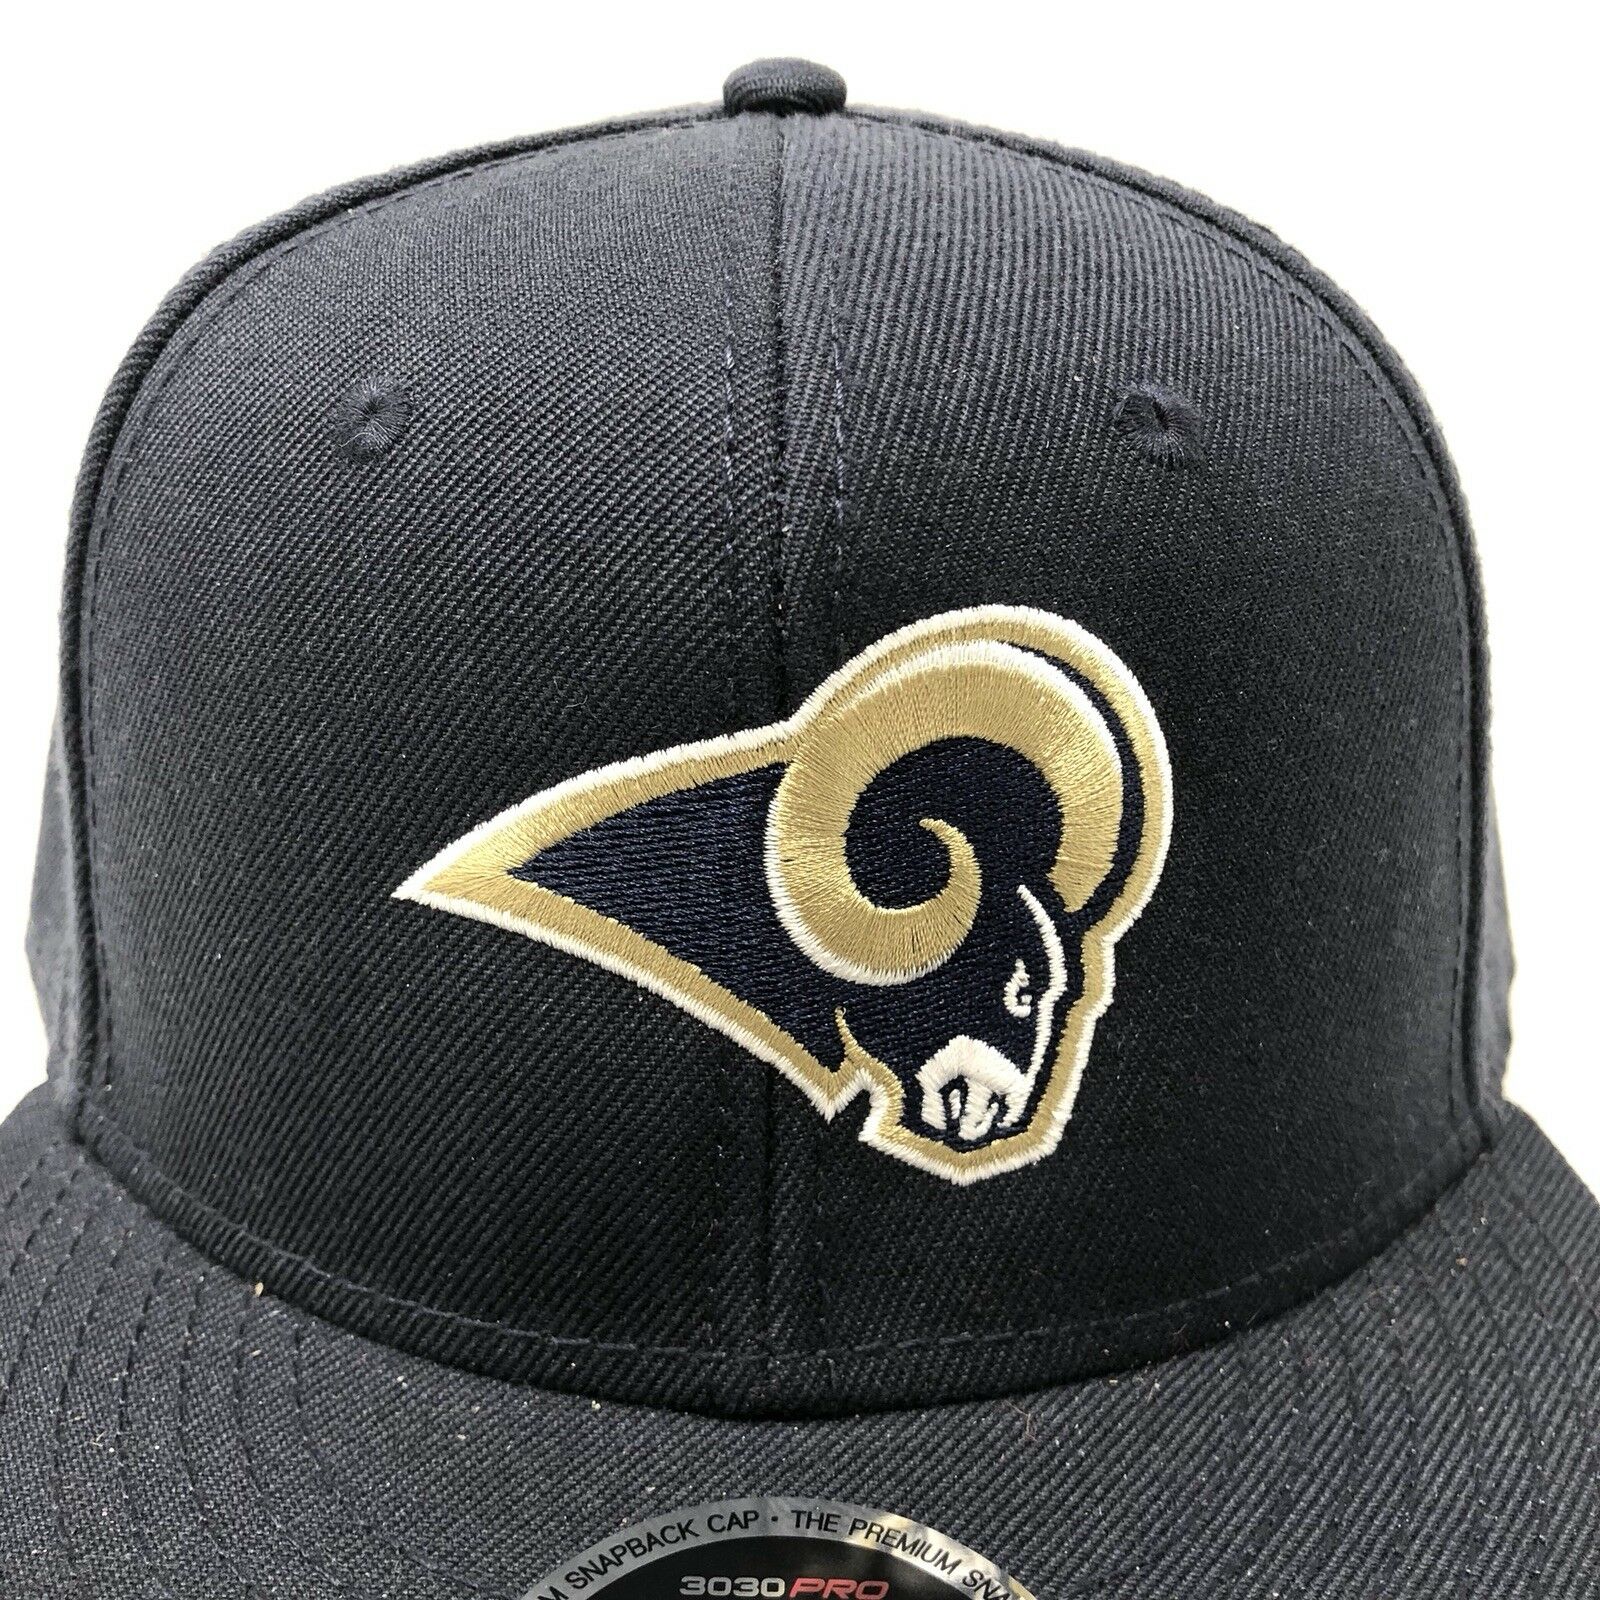 2016 nfl draft day hats